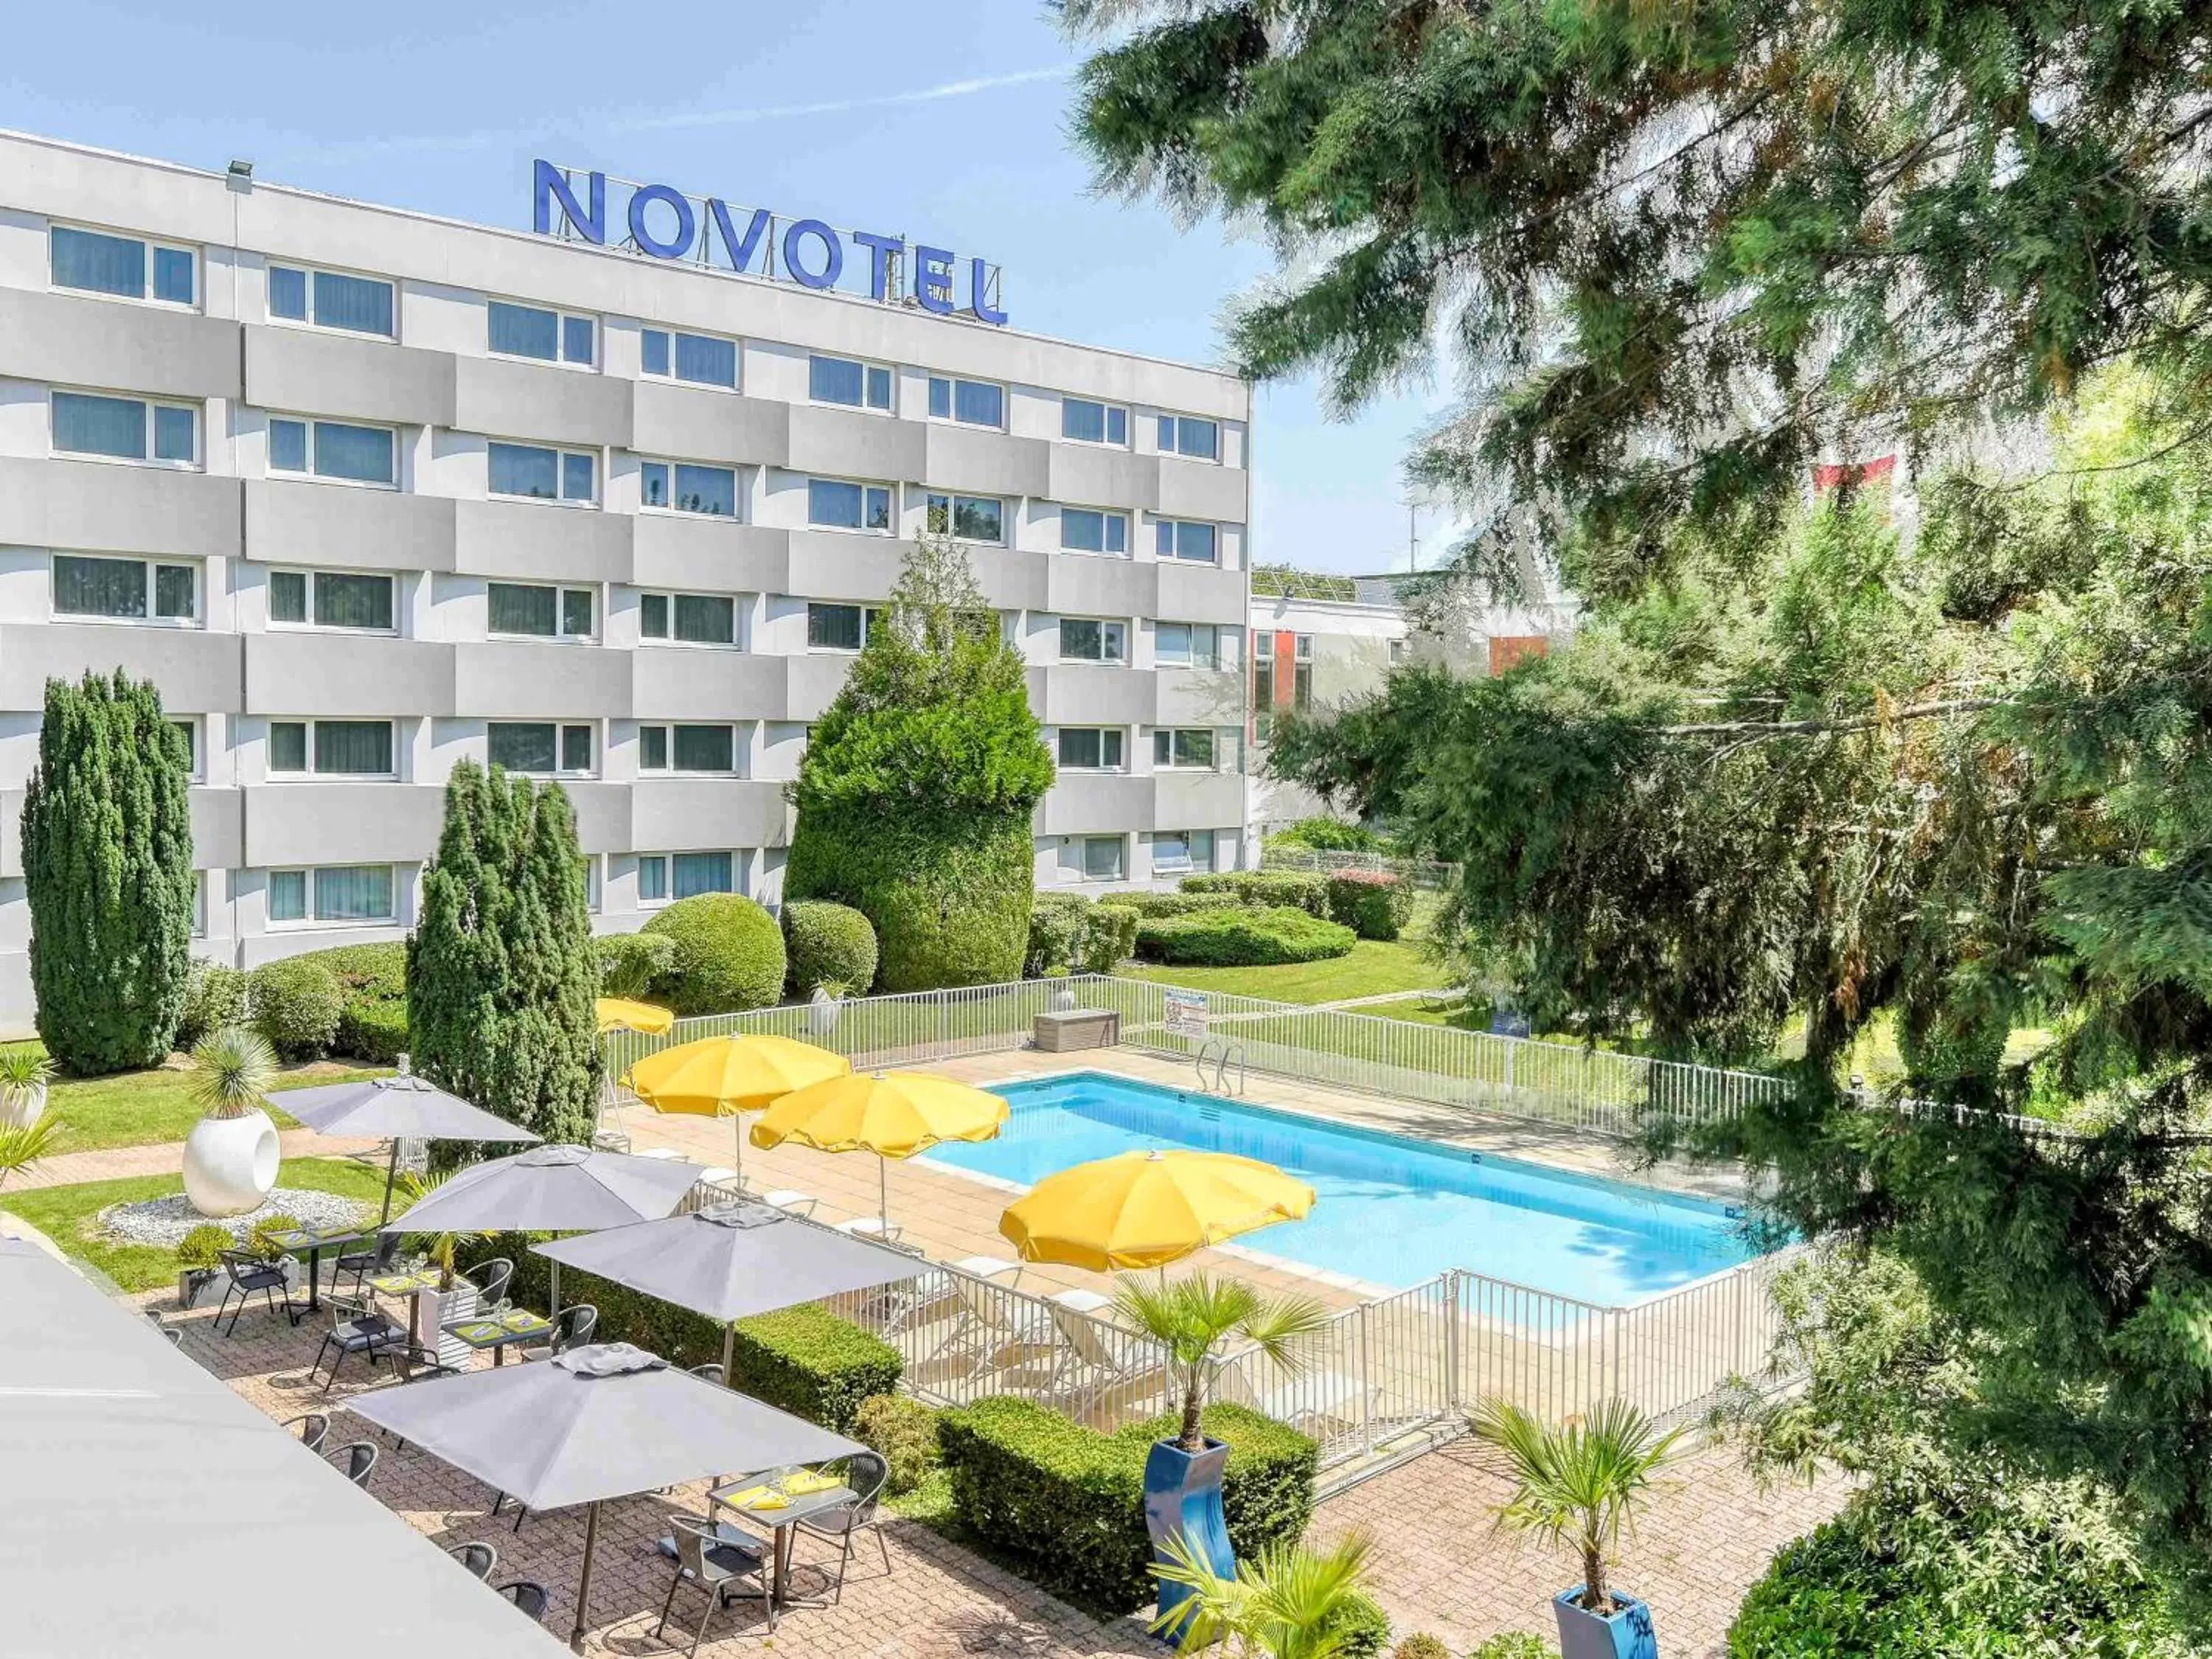 Property building, Swimming Pool in Novotel Paris Nord Expo Aulnay